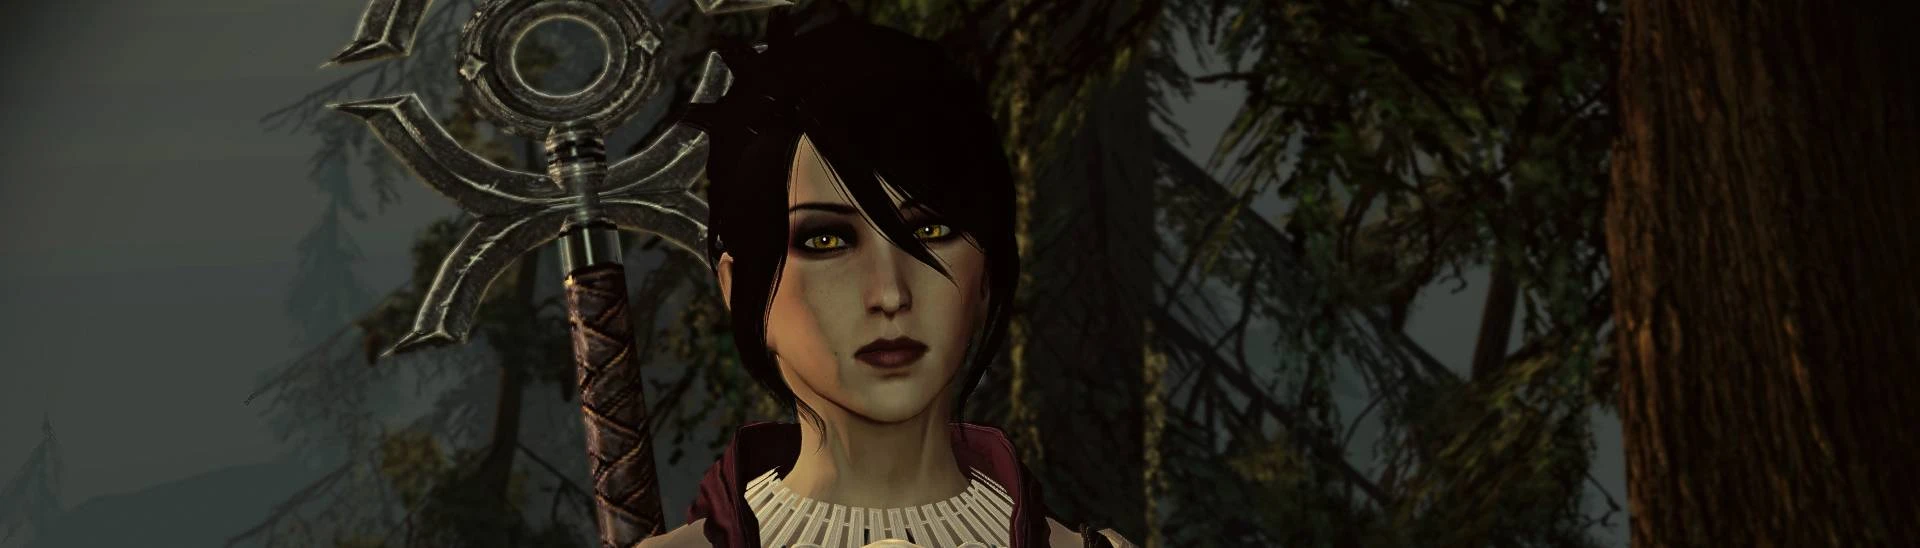 Tchos' Gaming and Modding: Morrigan and Leliana face and armour mods